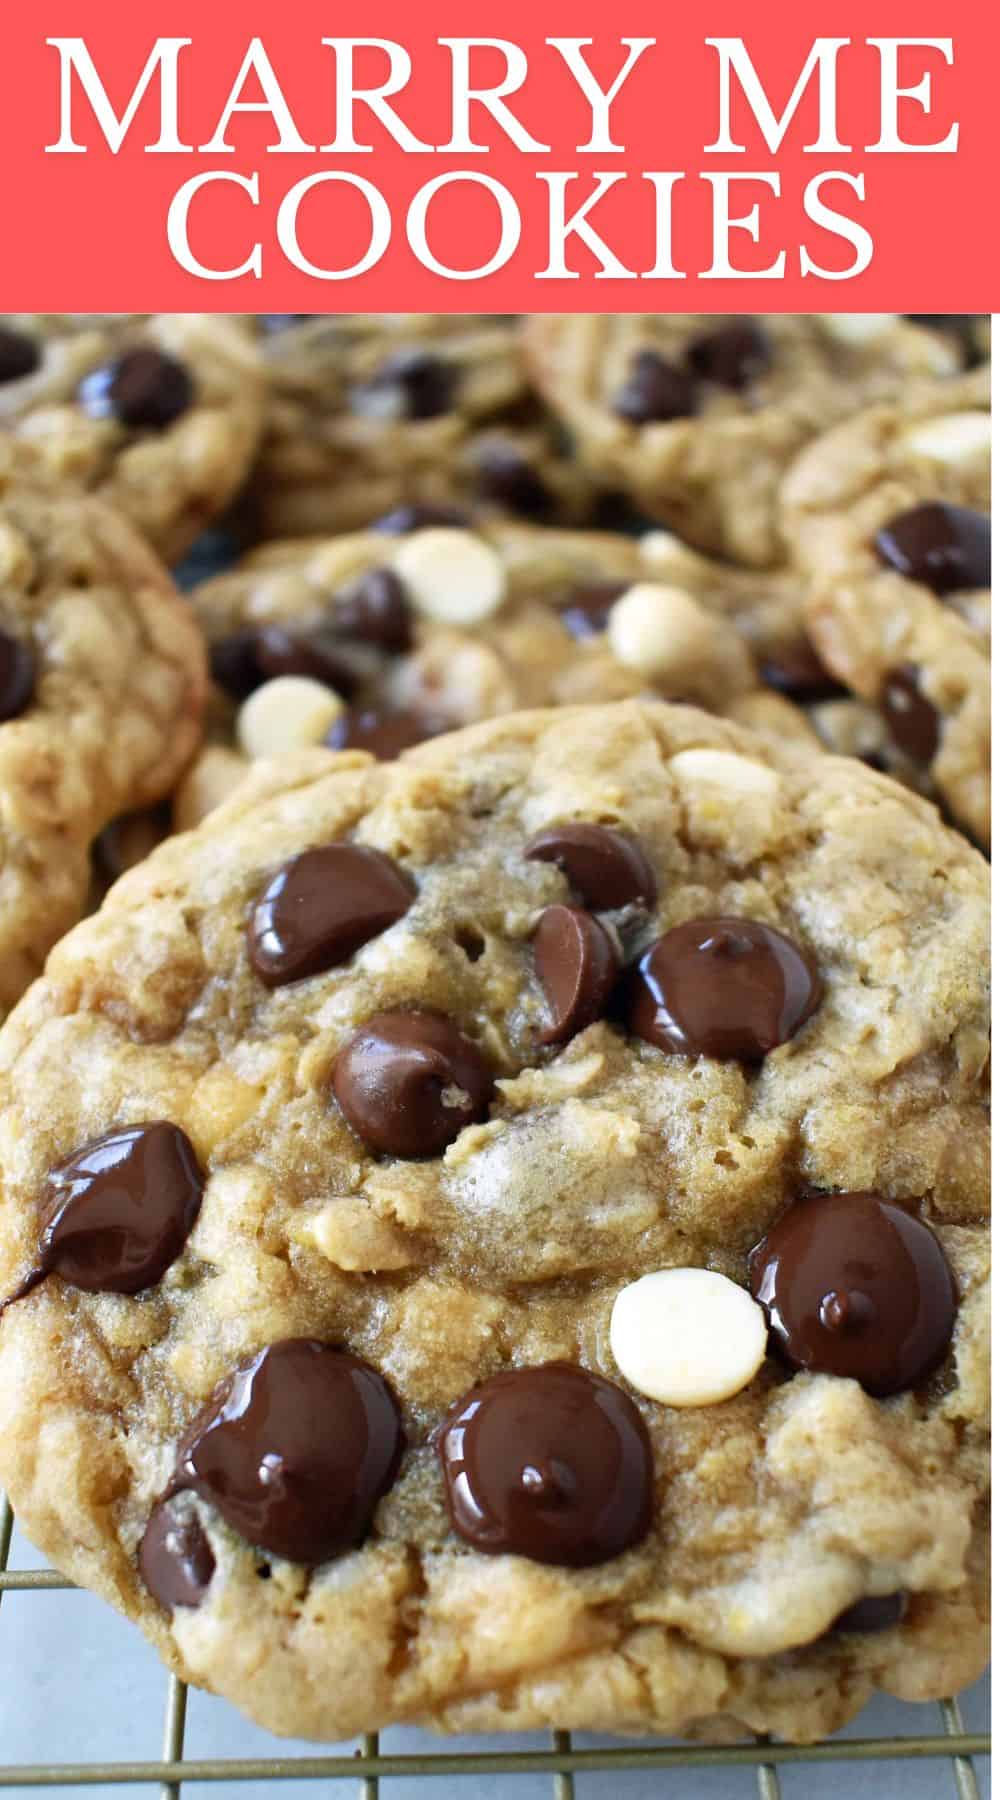 How to make the famous "I Want to Marry You Cookies" aka Marry Me Cookies. These brown butter cookies with oatmeal, semi sweet chocolate chips, and white chocolate are known to cause marriage proposals.